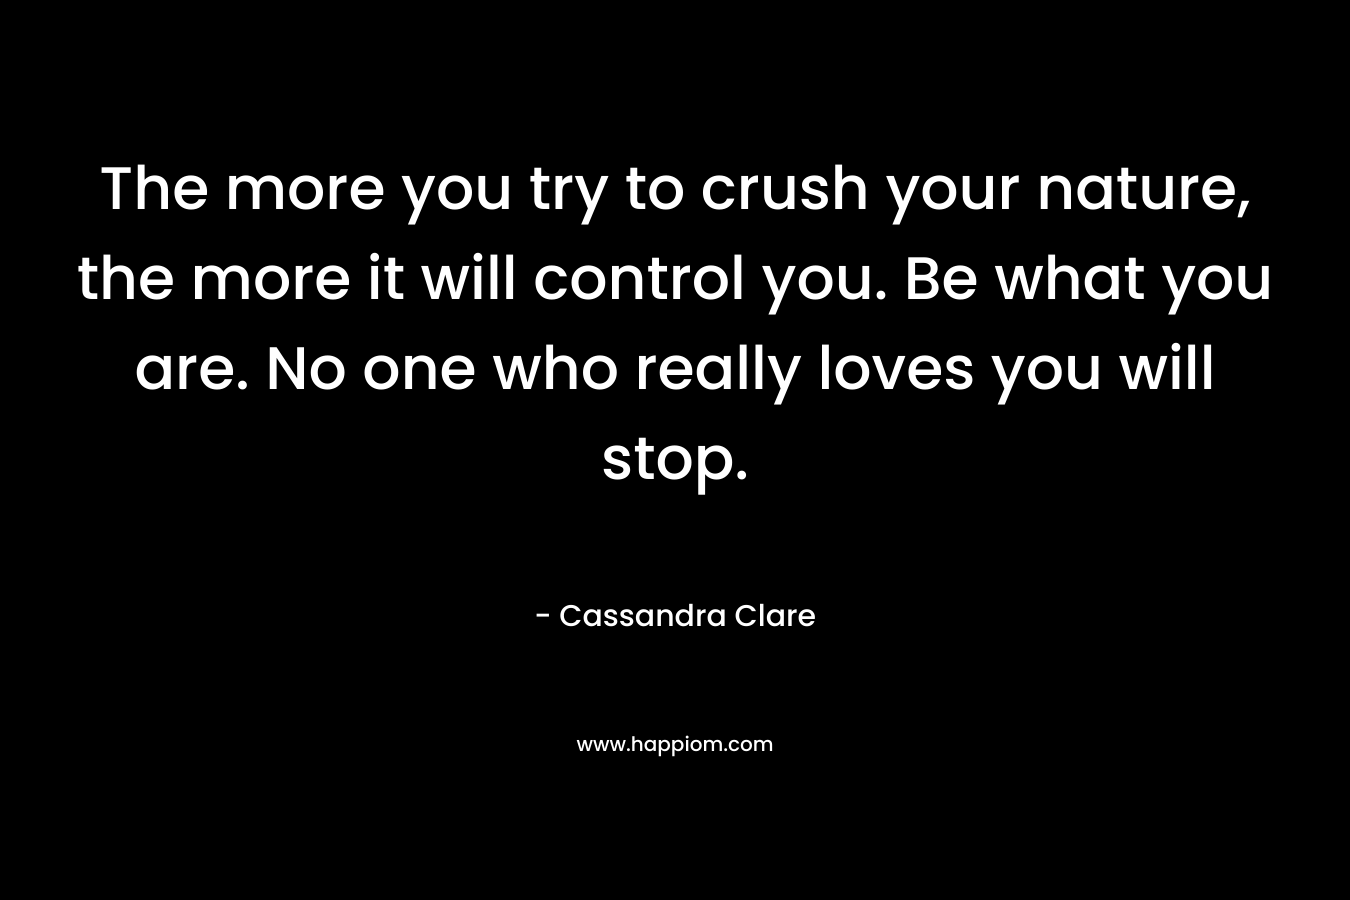 The more you try to crush your nature, the more it will control you. Be what you are. No one who really loves you will stop.